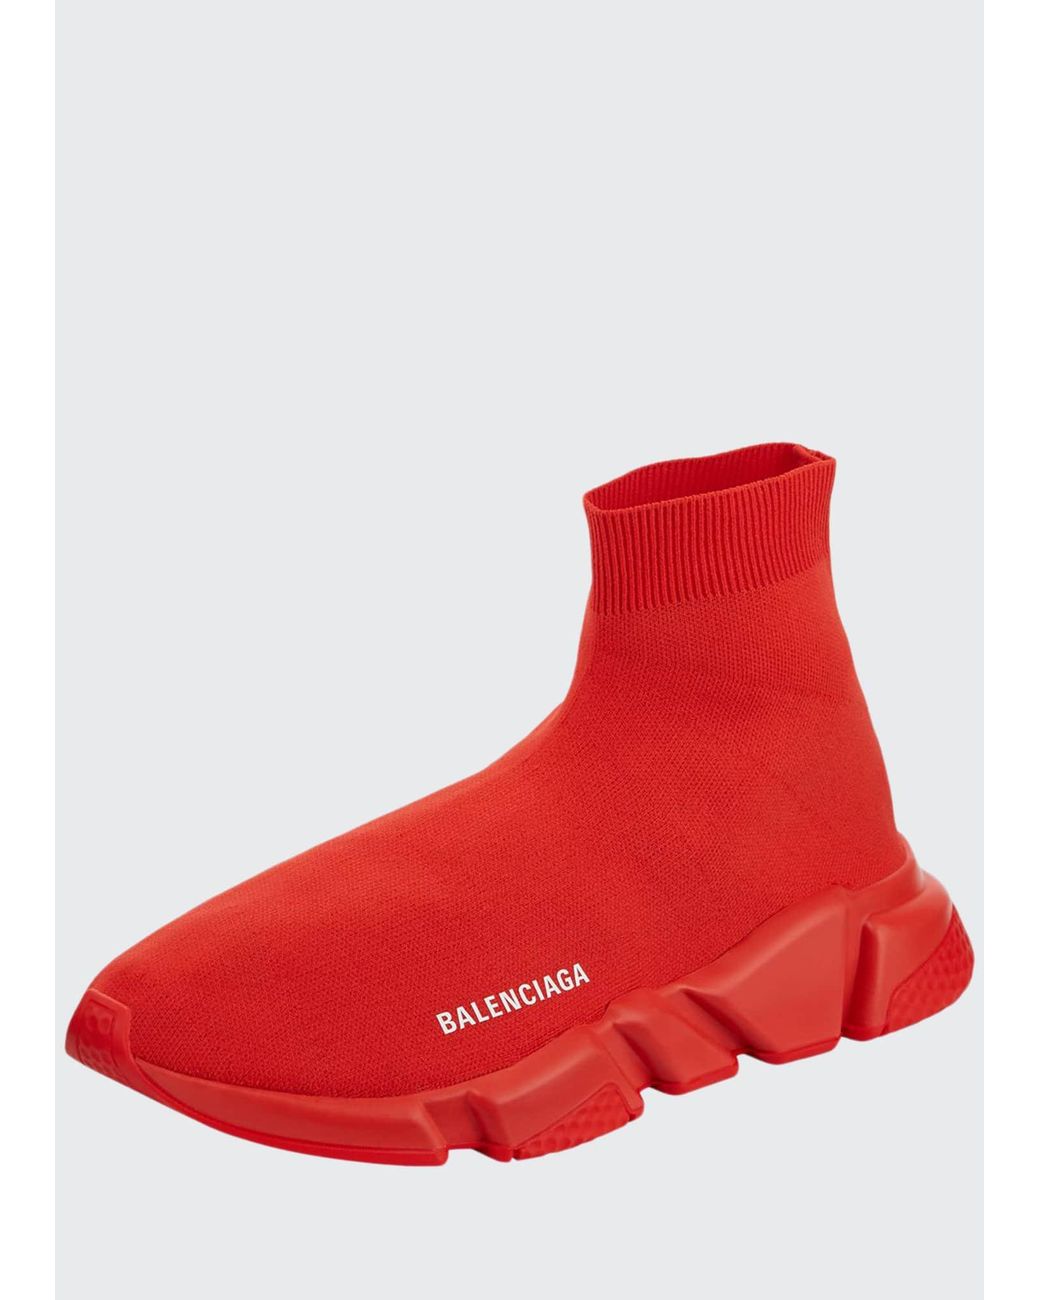 With Tonal Rubber Sole in Red for Men 